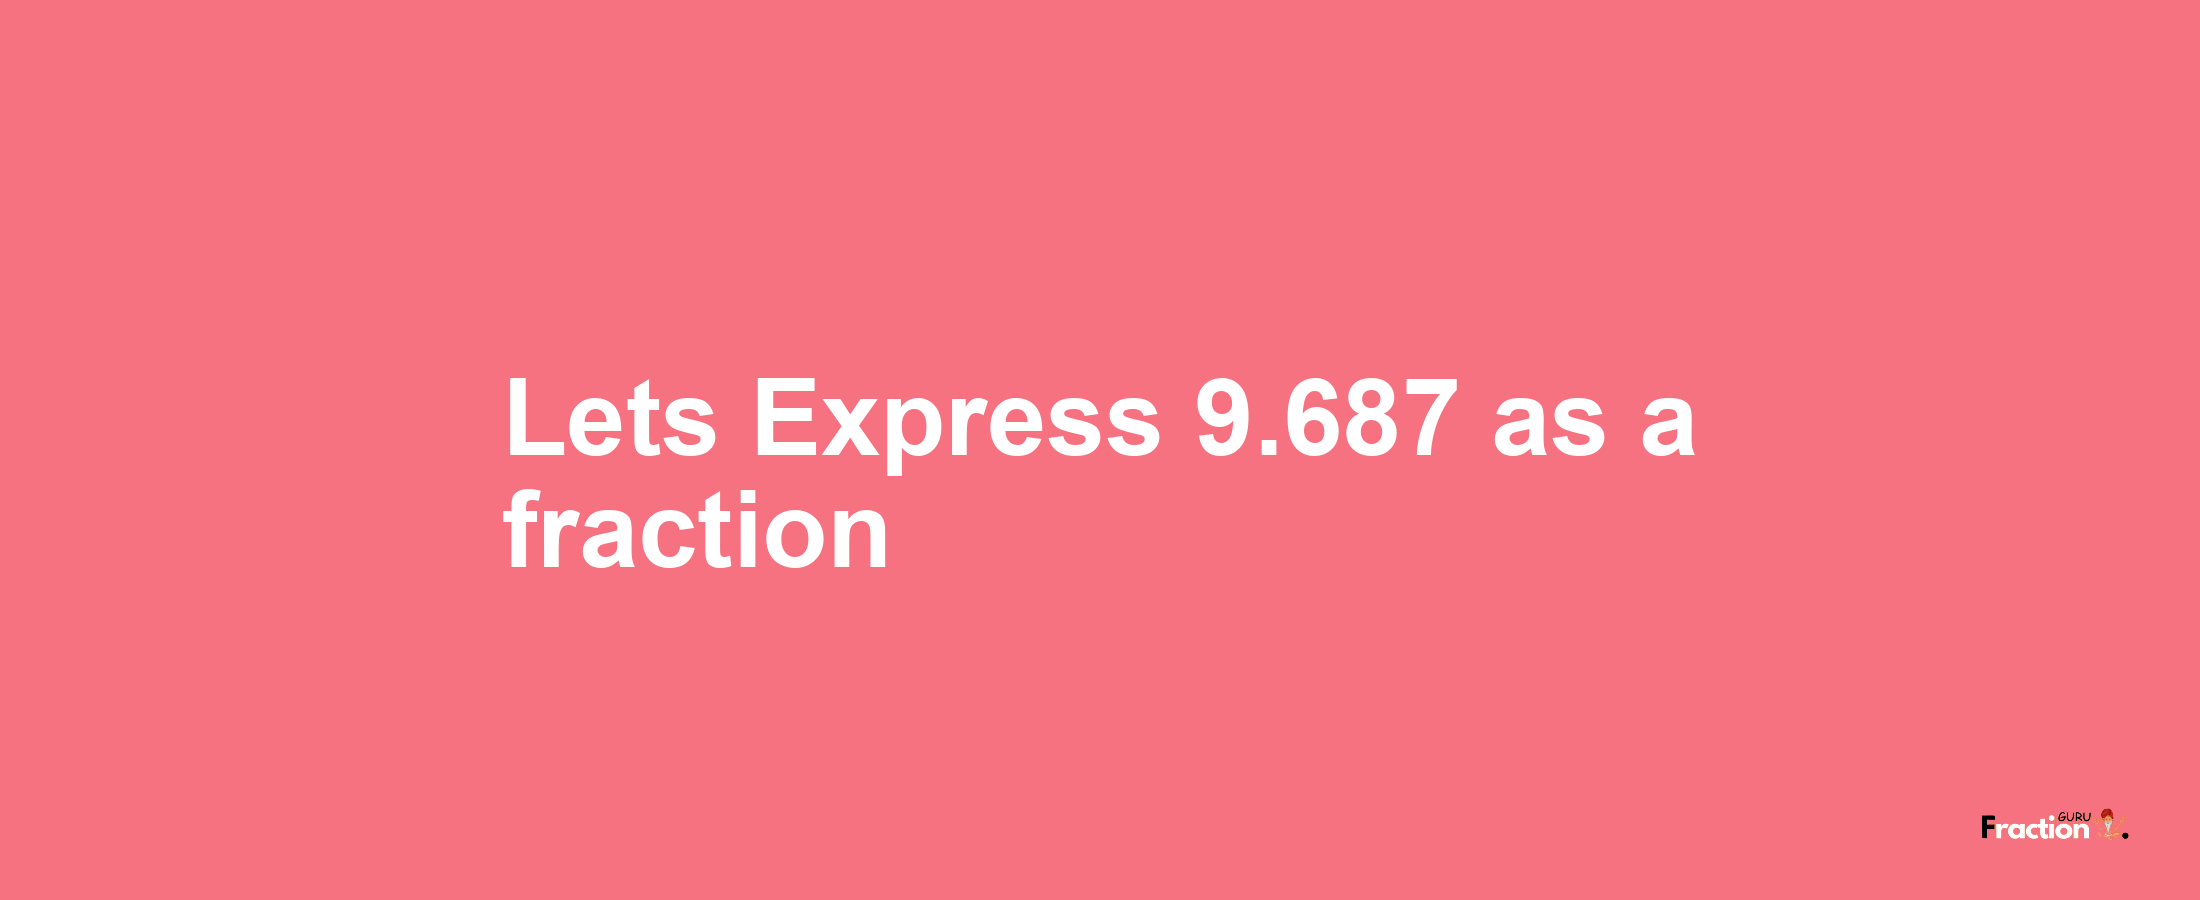 Lets Express 9.687 as afraction